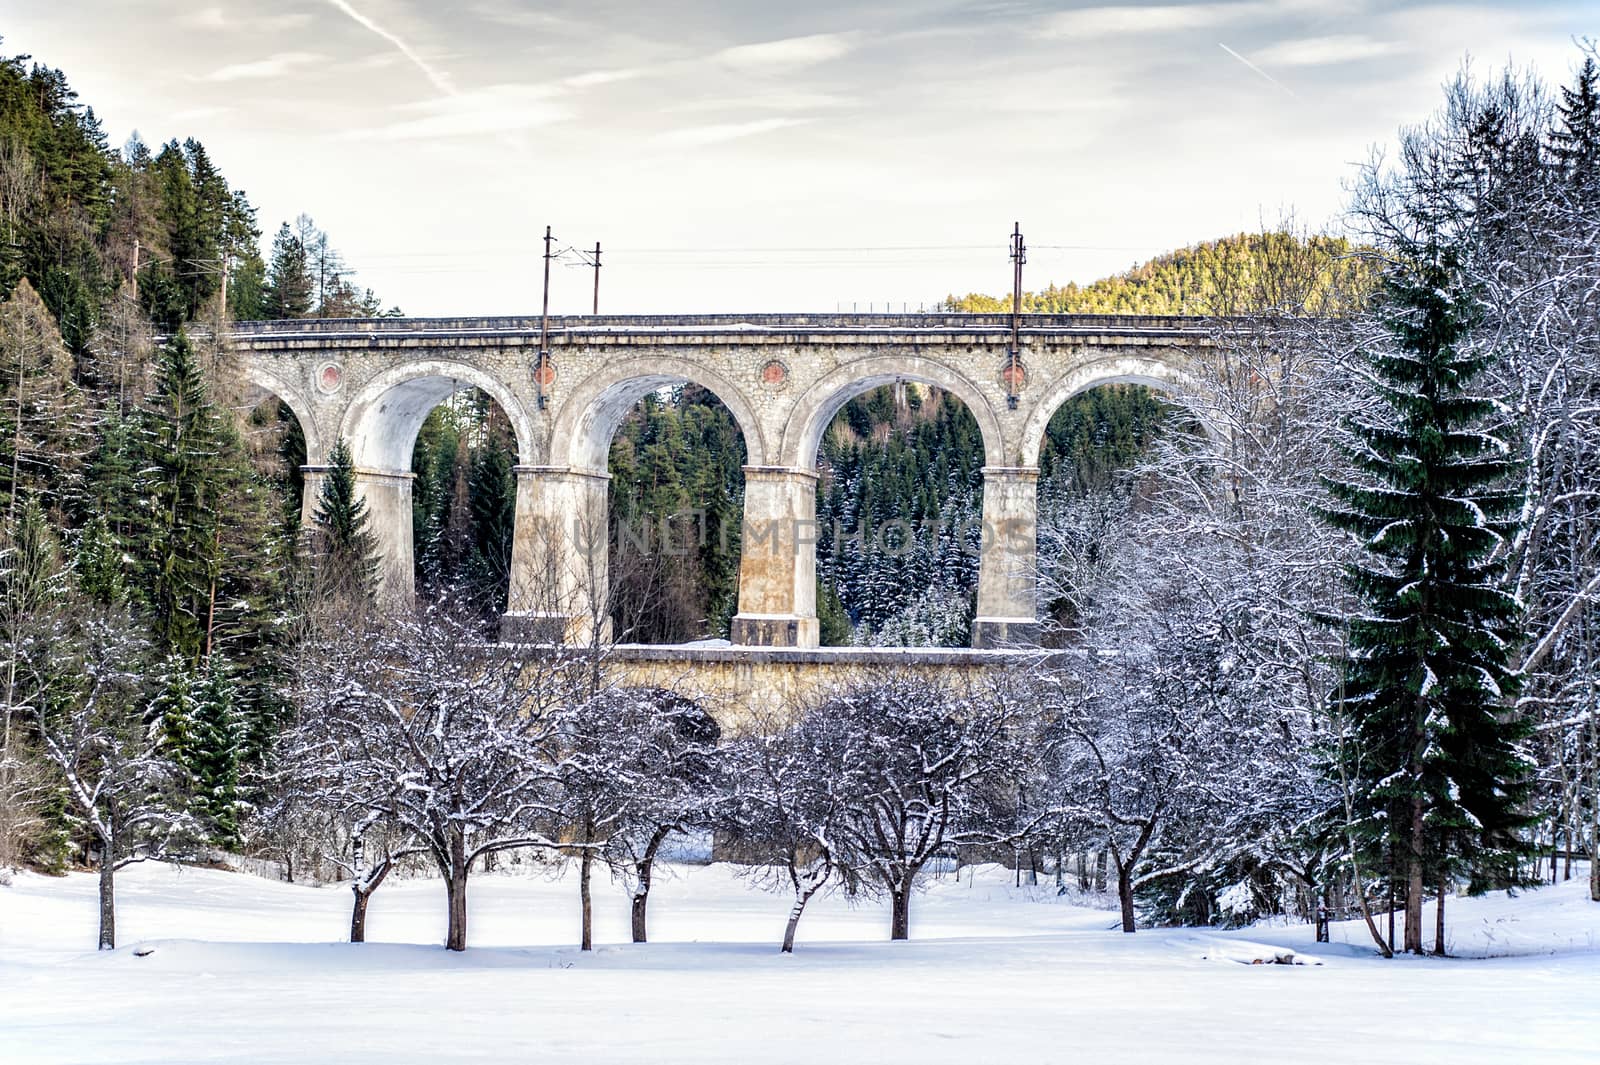 Ancient Viaduct in Lower Austria by tepic